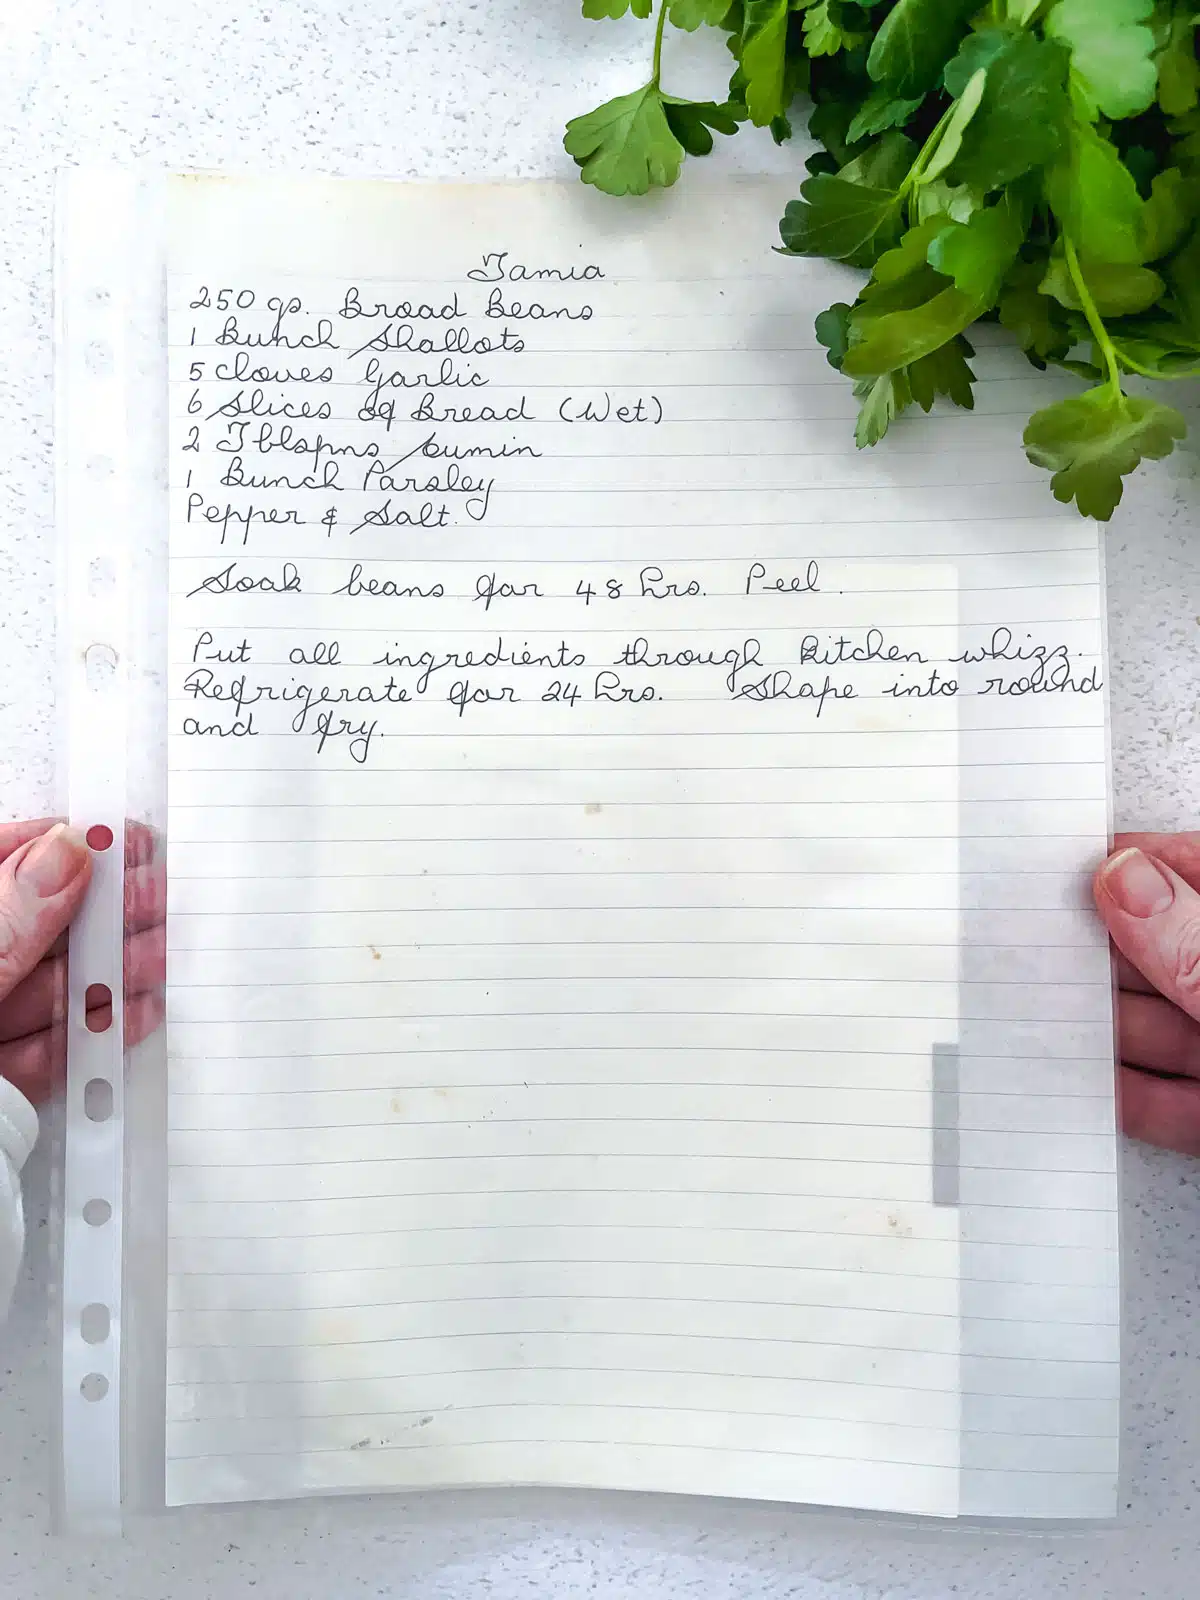 2 white hands are holding a lined piece of paper with a recipe written on it. Some bright green parsley is on the bench at the top right of the image.